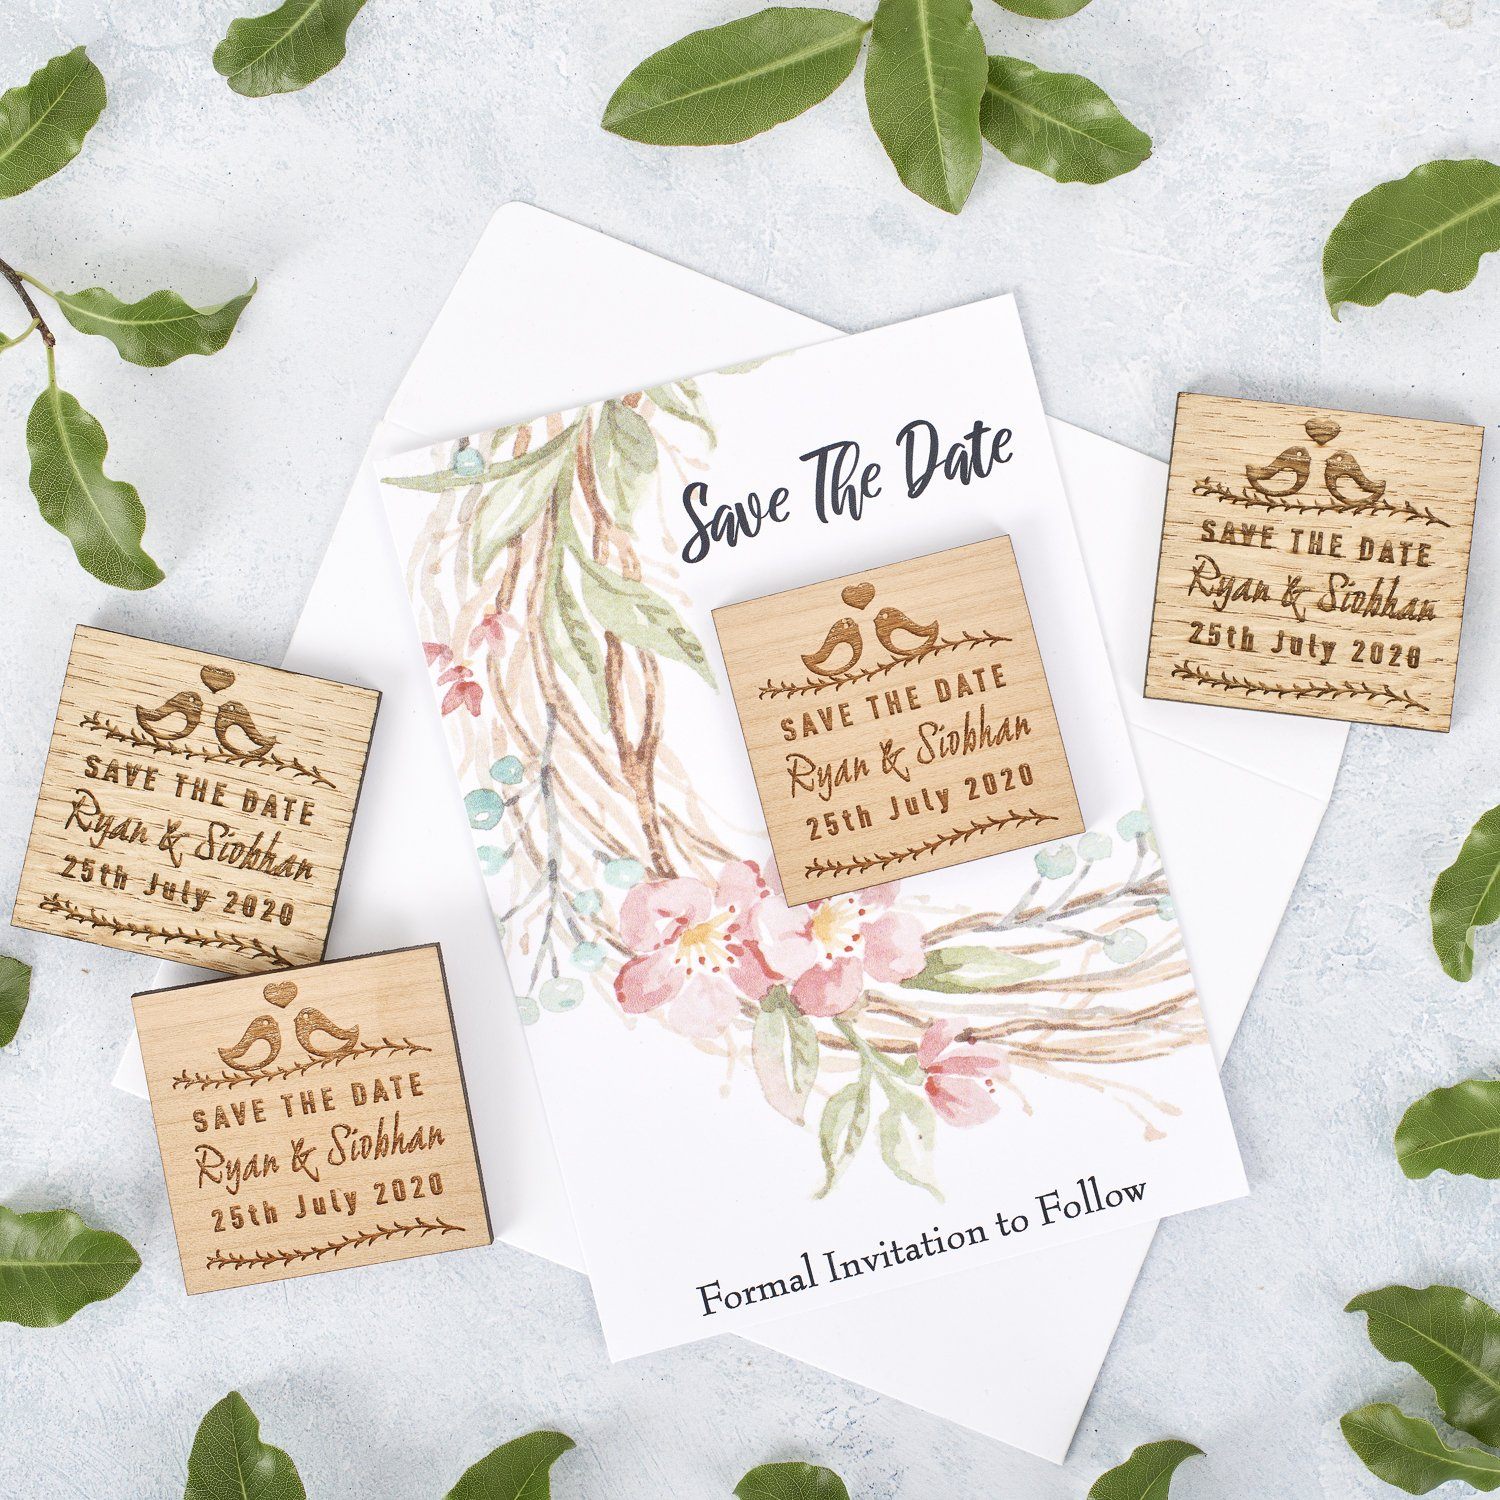 Save The Date Magnet With Cards - Save The Date Magnet Wooden Rustic & Cards - Square Lovebird